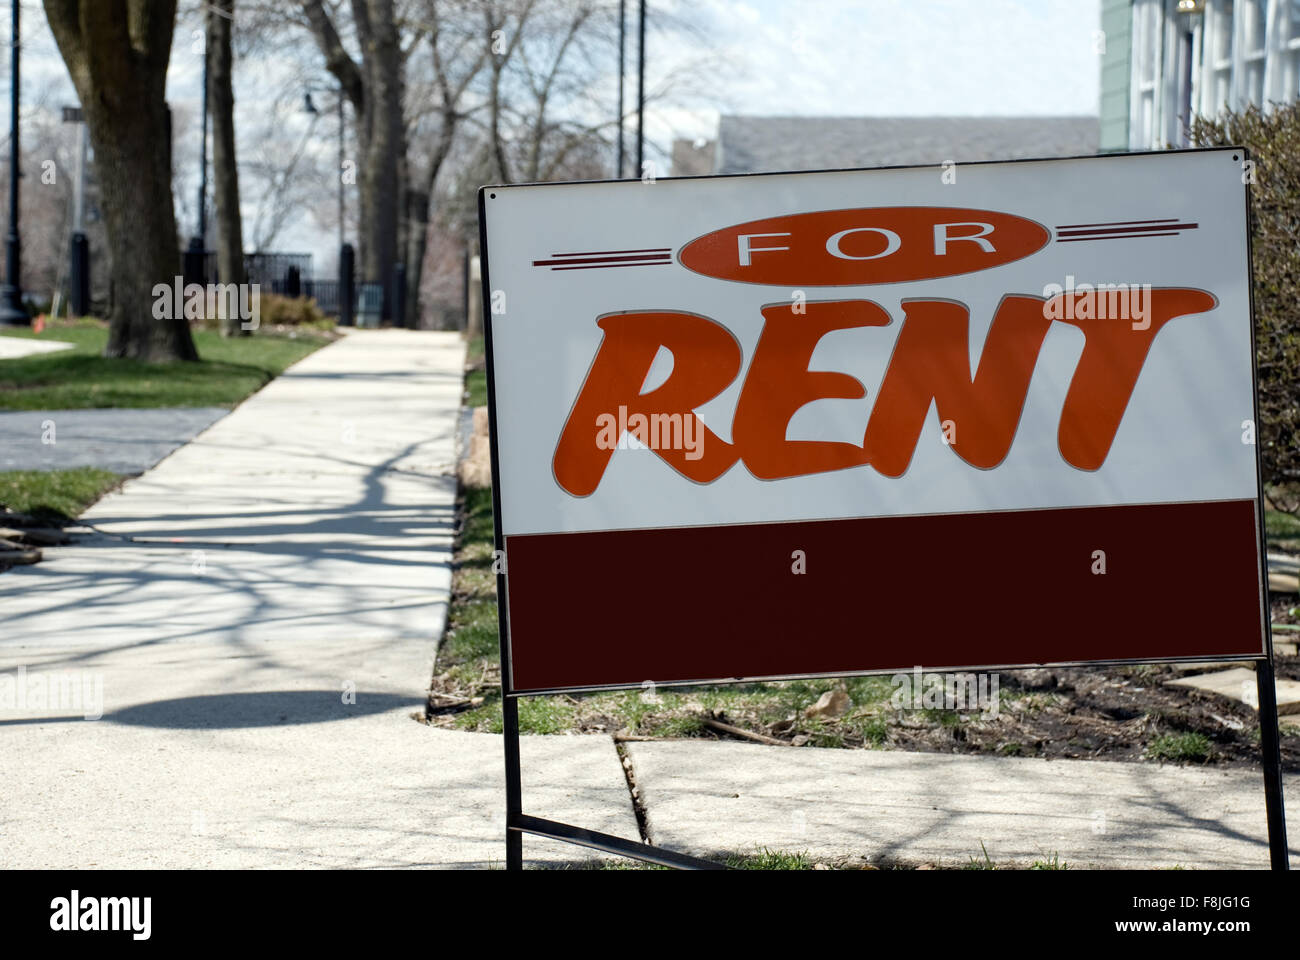 For Rent Sign. Picture of a for rent sign in front of a house in a suburban neighborhood Stock Photo